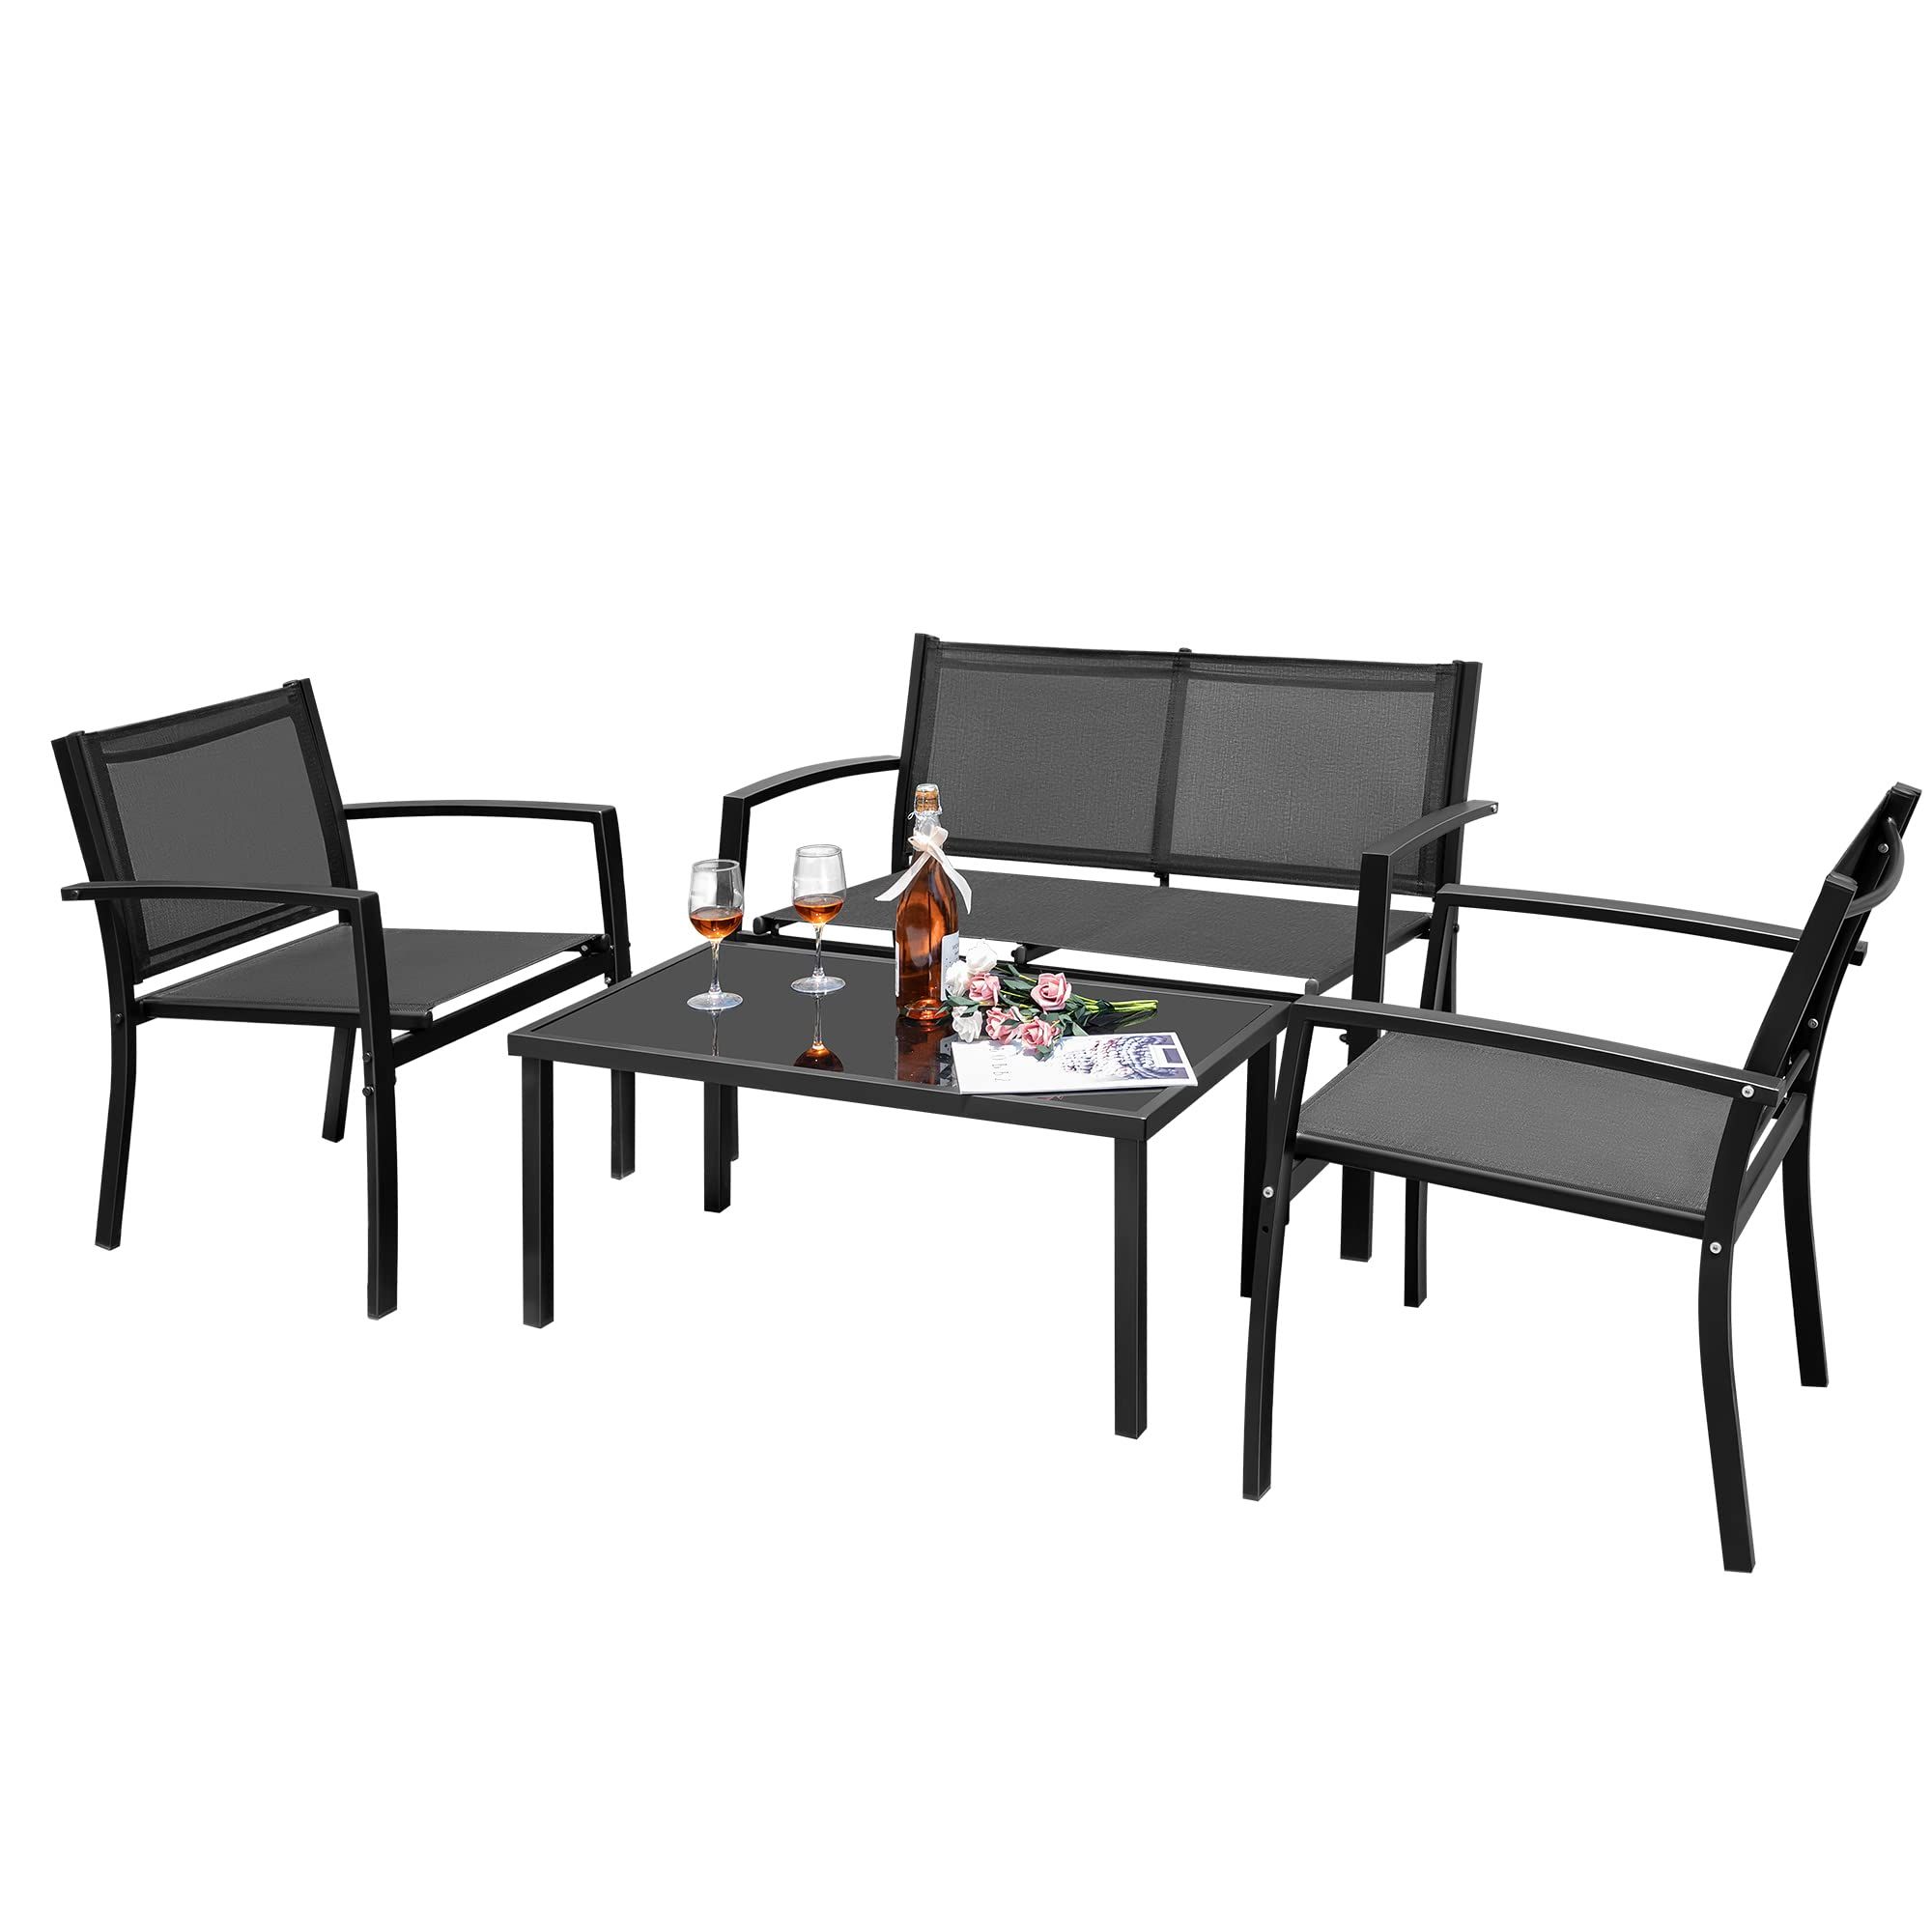 Most Up To Date Textilene Bistro Set Modern Conversation Set Within Amazon: Flamaker 4 Pieces Patio Furniture Outdoor Furniture Outdoor Patio  Furniture Set Textilene Bistro Set Modern Conversation Set Black Bistro Set  With Loveseat Tea Table For Home, Lawn And Balcony (black) : (View 9 of 15)